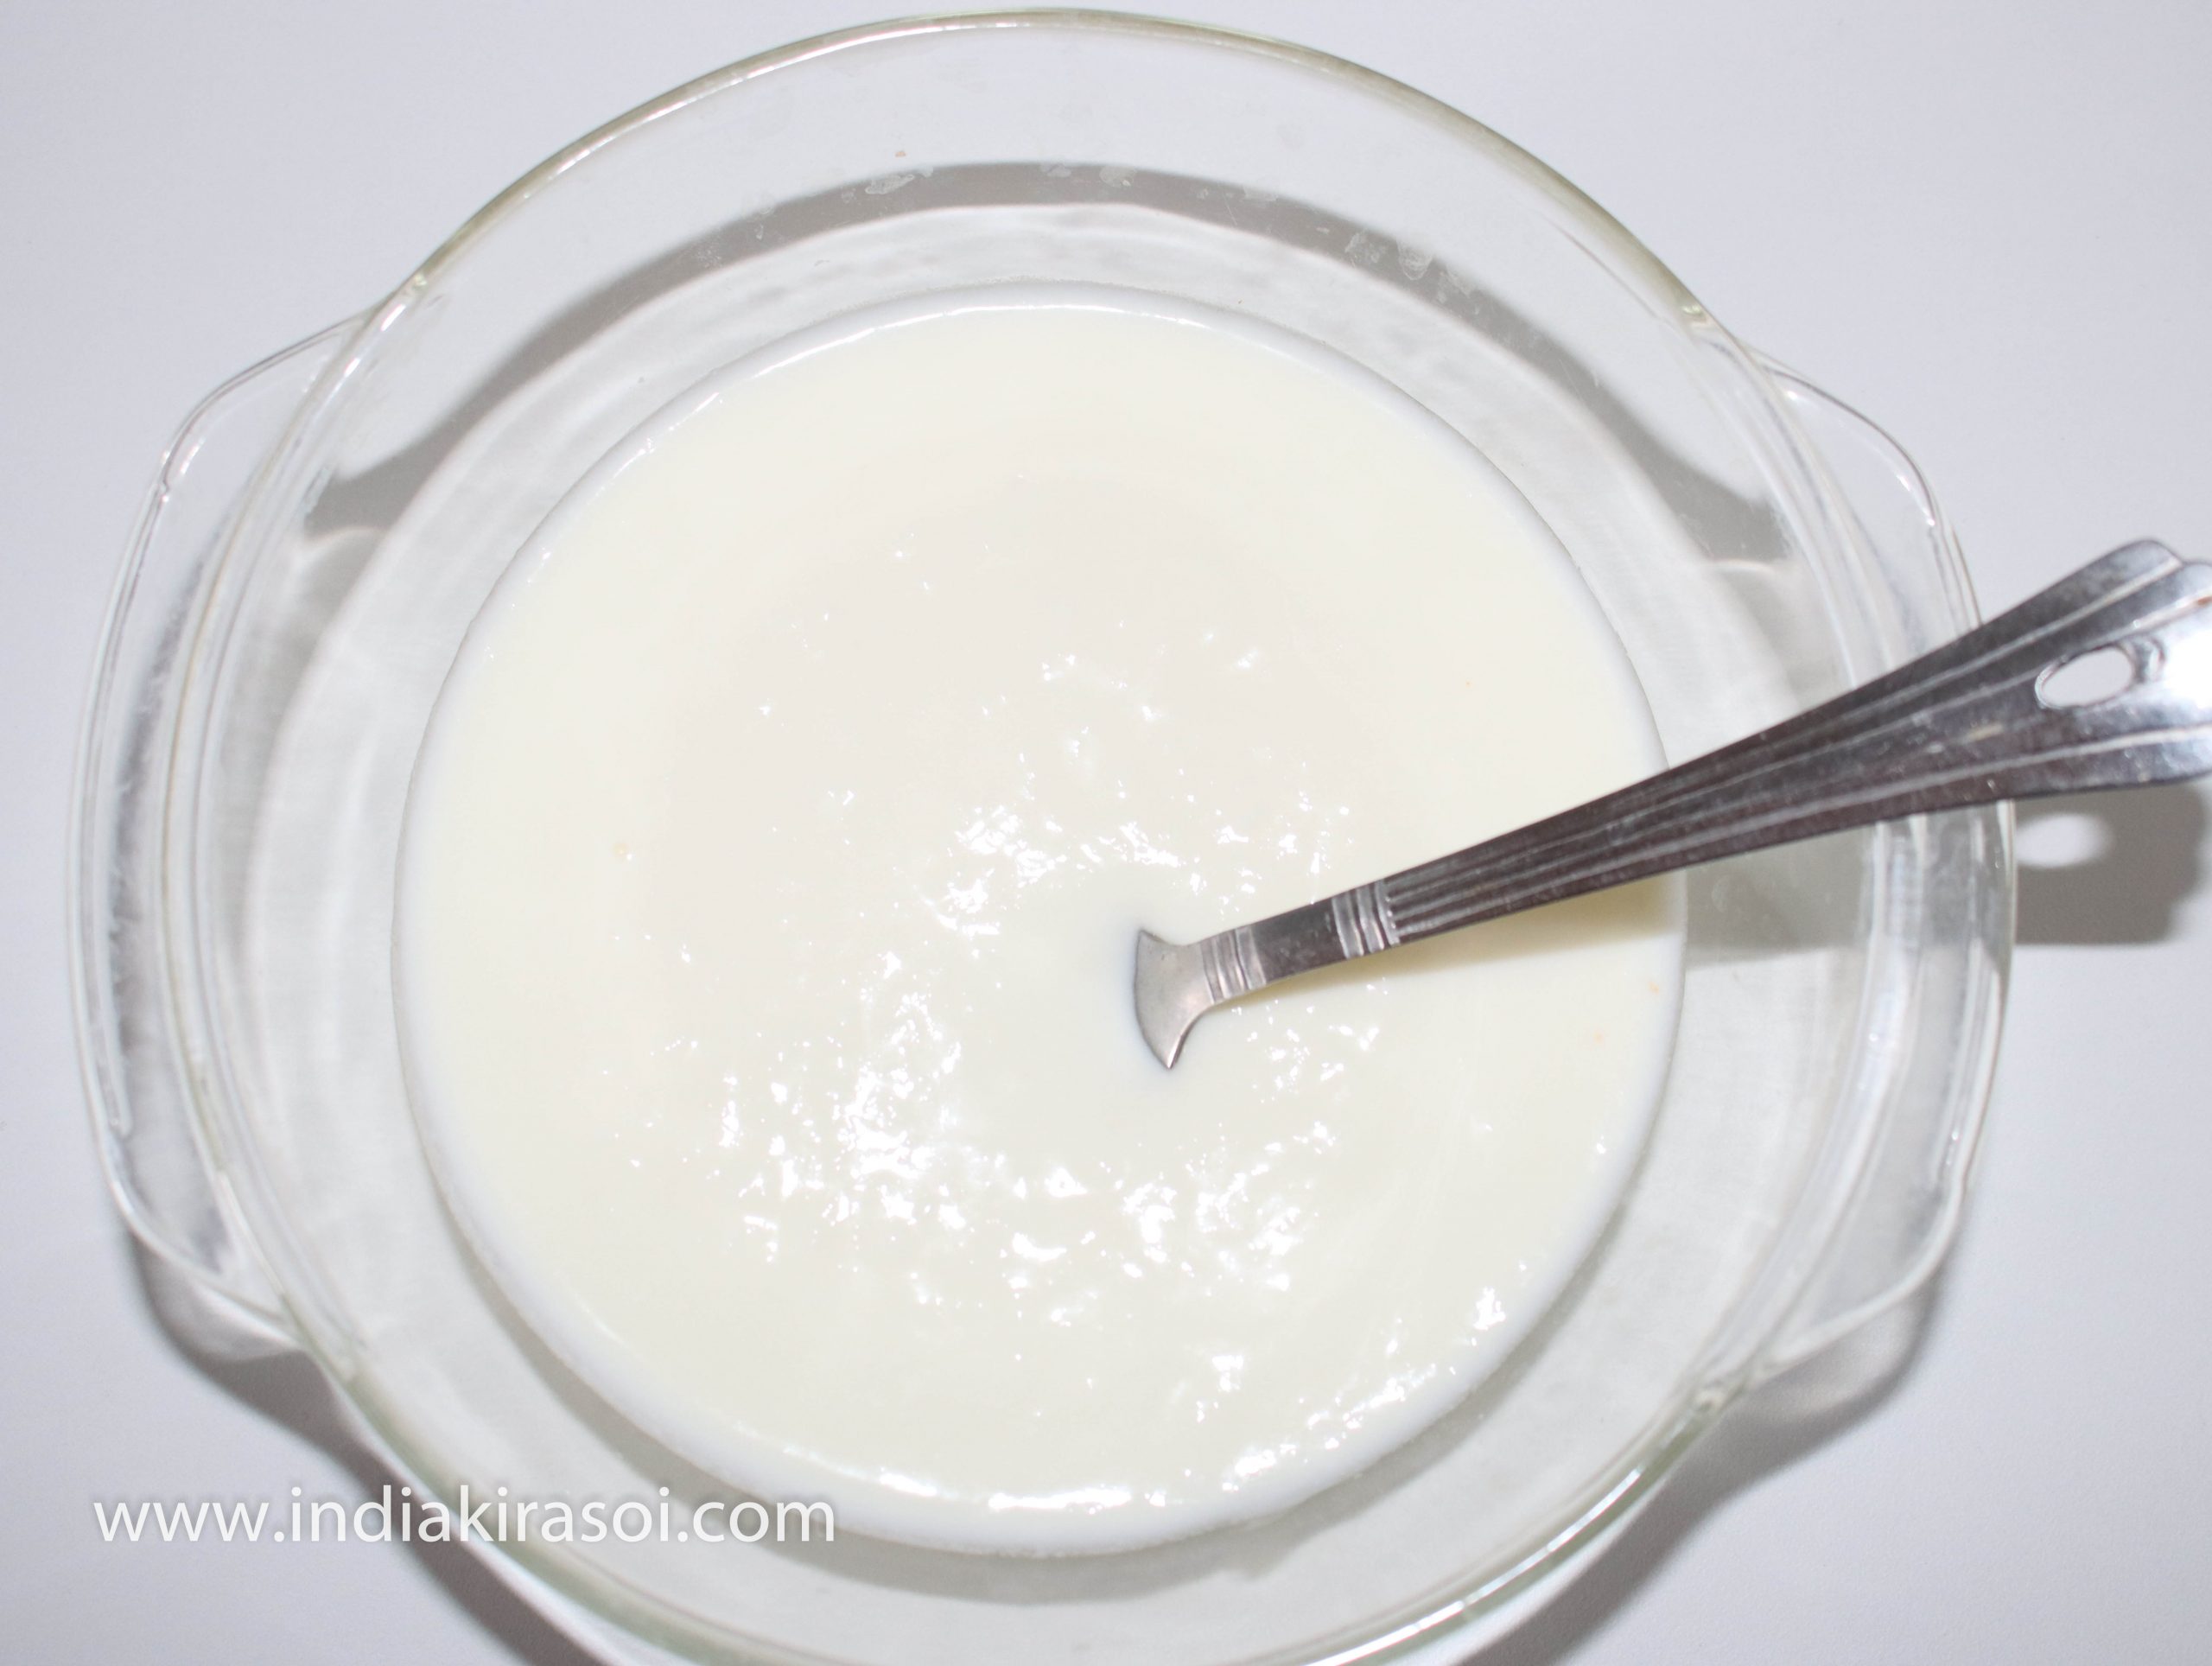 Take about 150 grams of curd/ yogurt in a bowl.